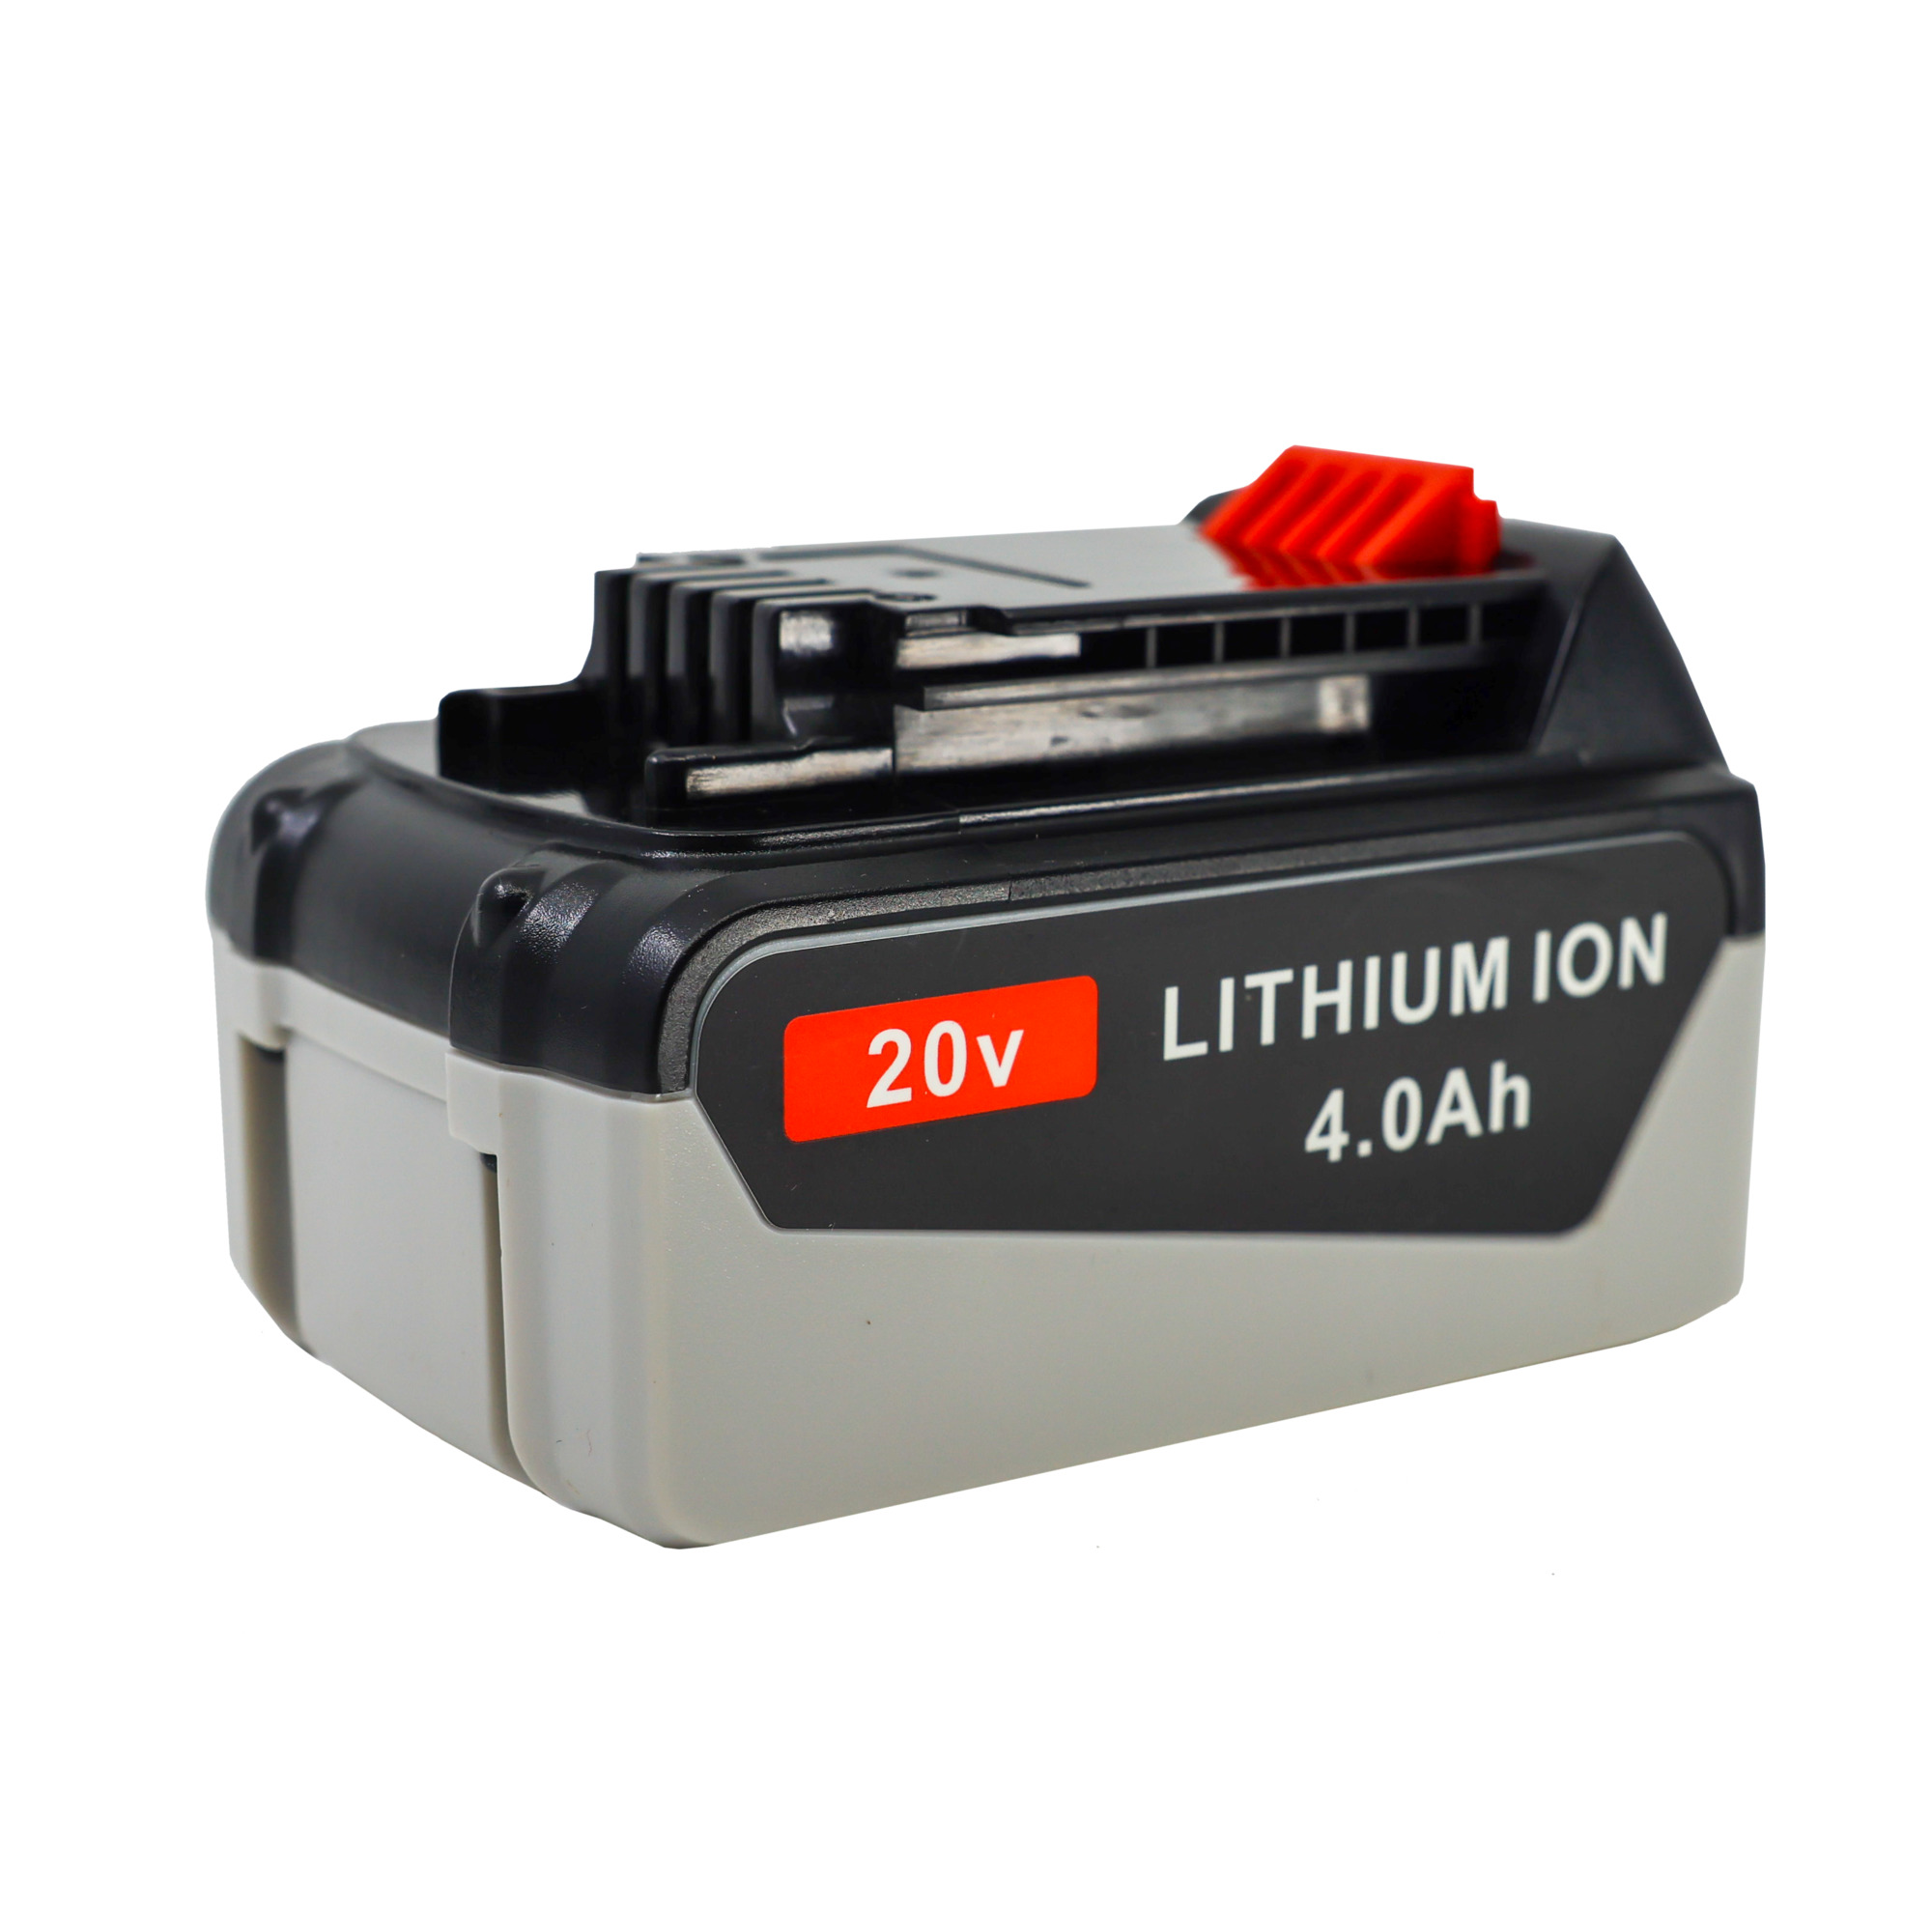 Trimyxs, 20V 4A, Replacement Battery Charger, Volts 20 Battery Amp Hours 4000 Model TRIM1025